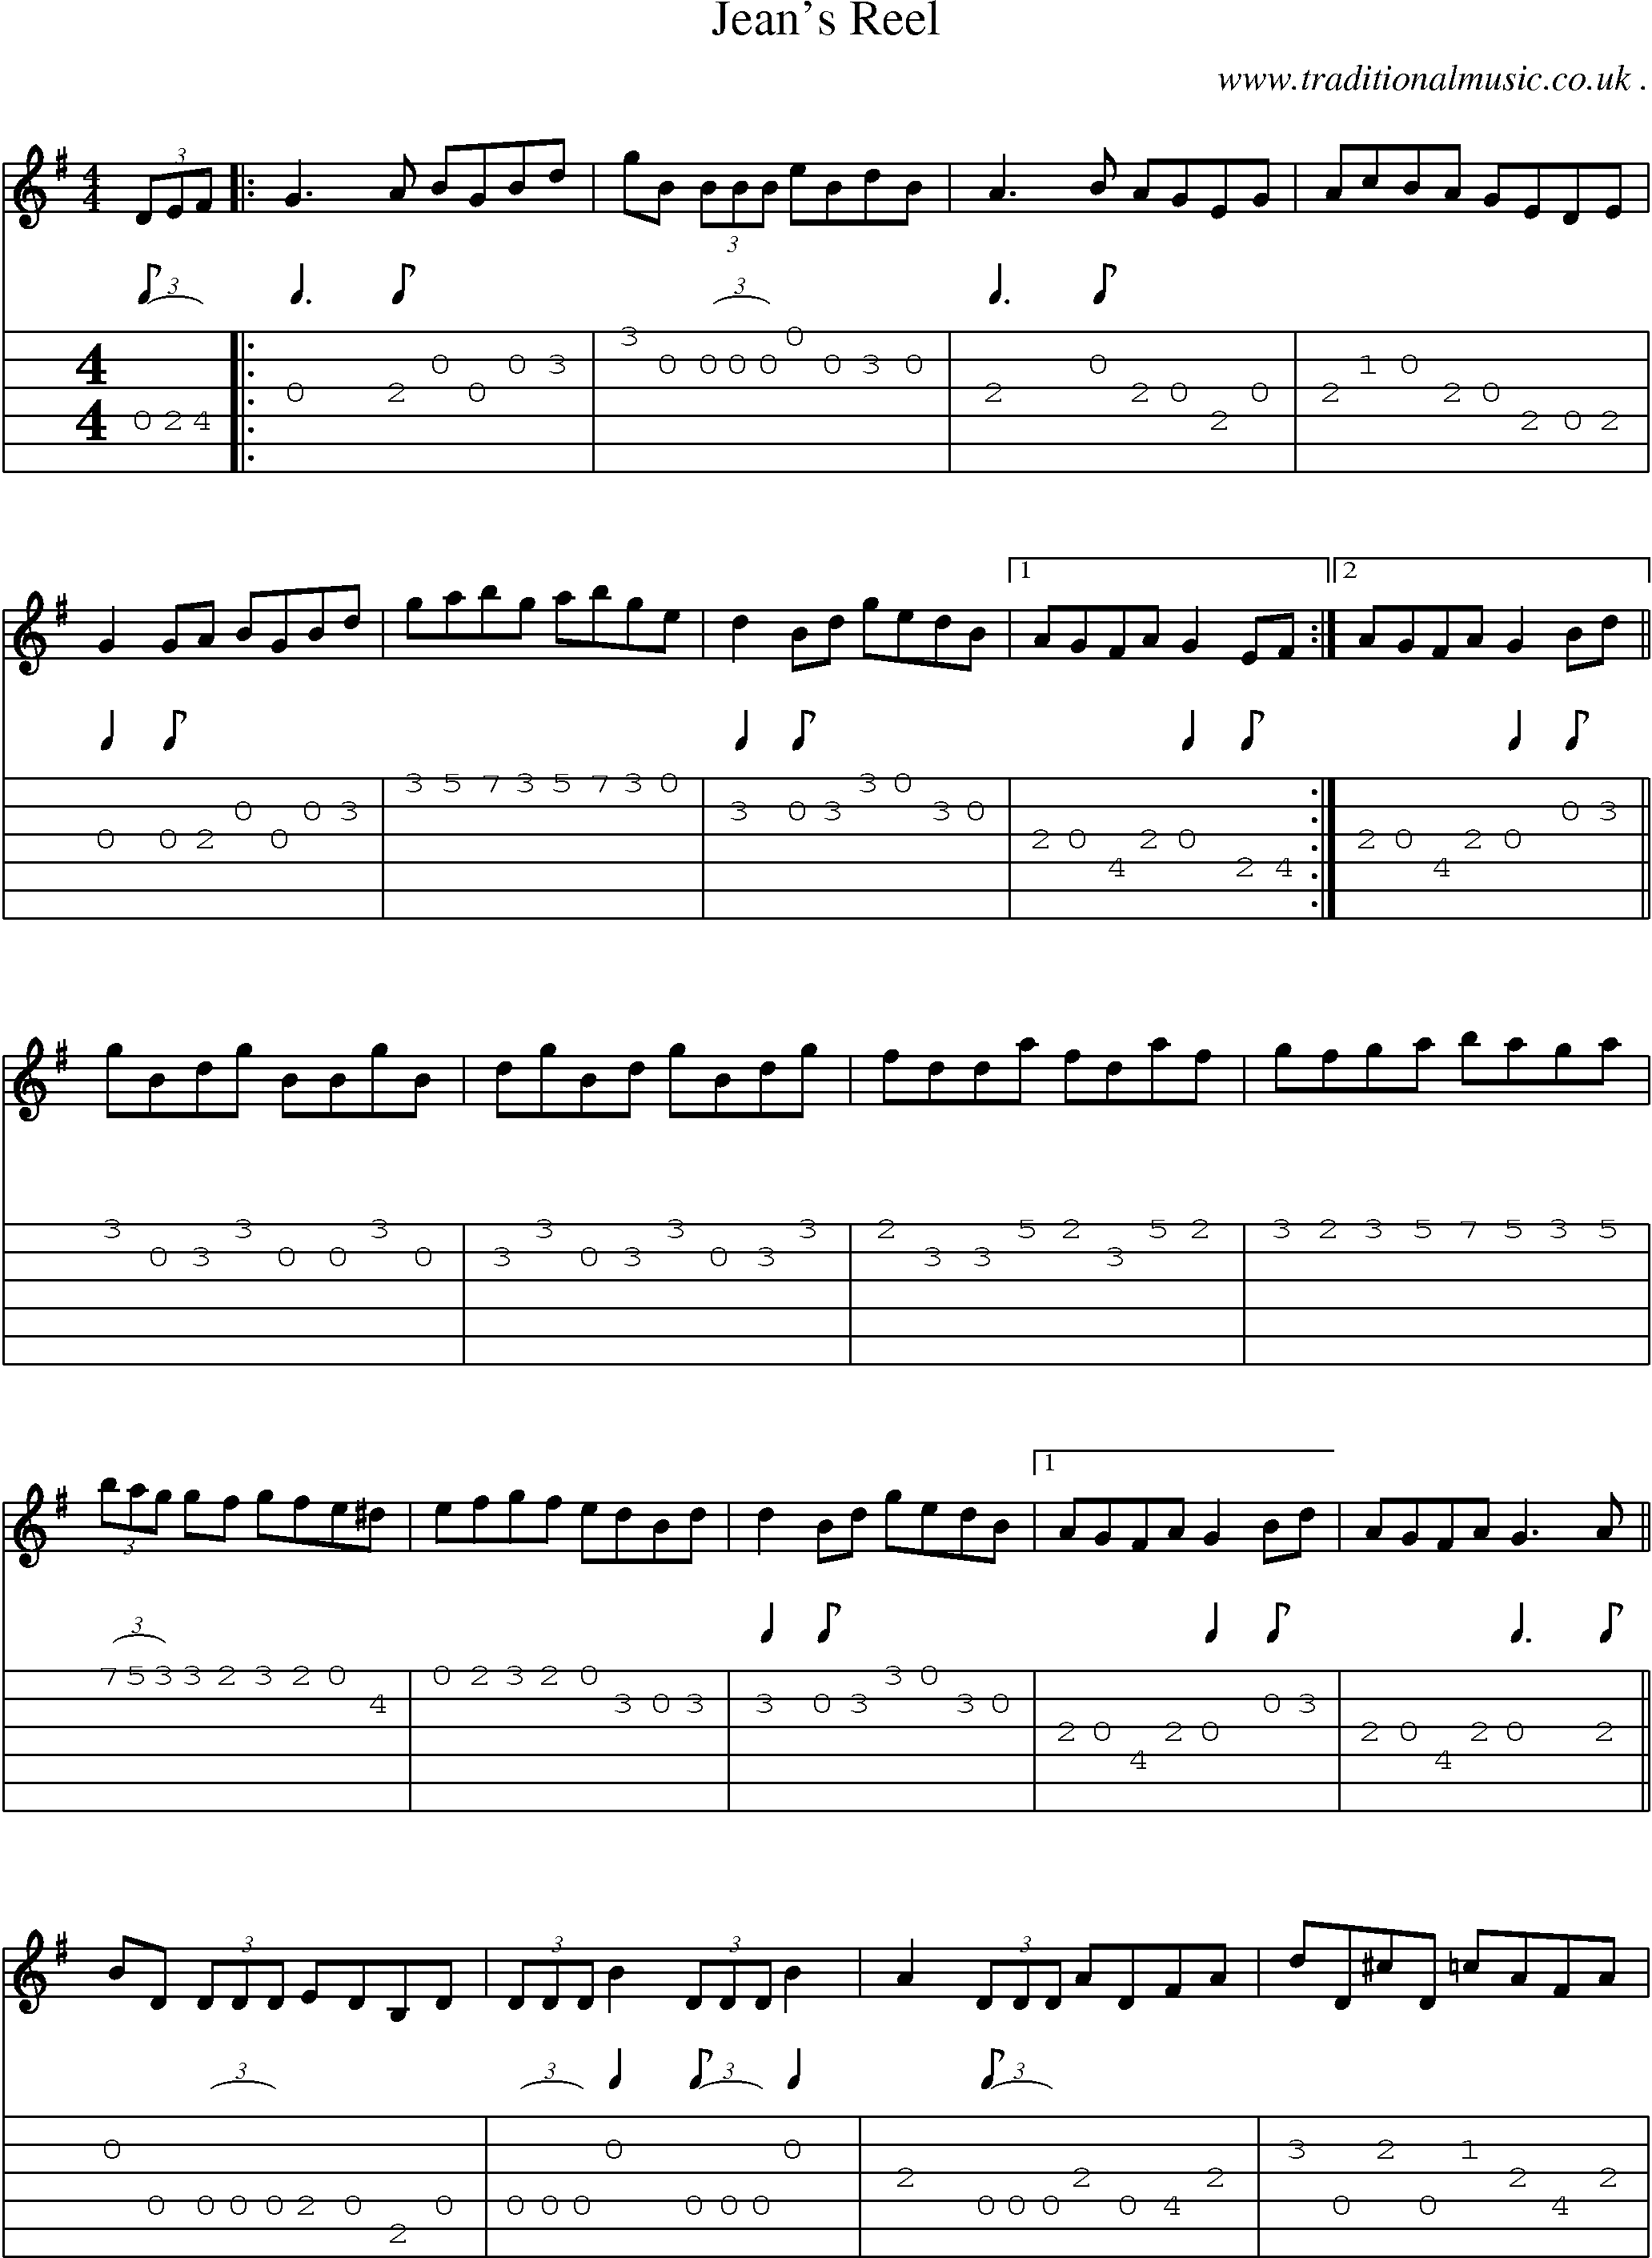 Sheet-Music and Guitar Tabs for Jeans Reel